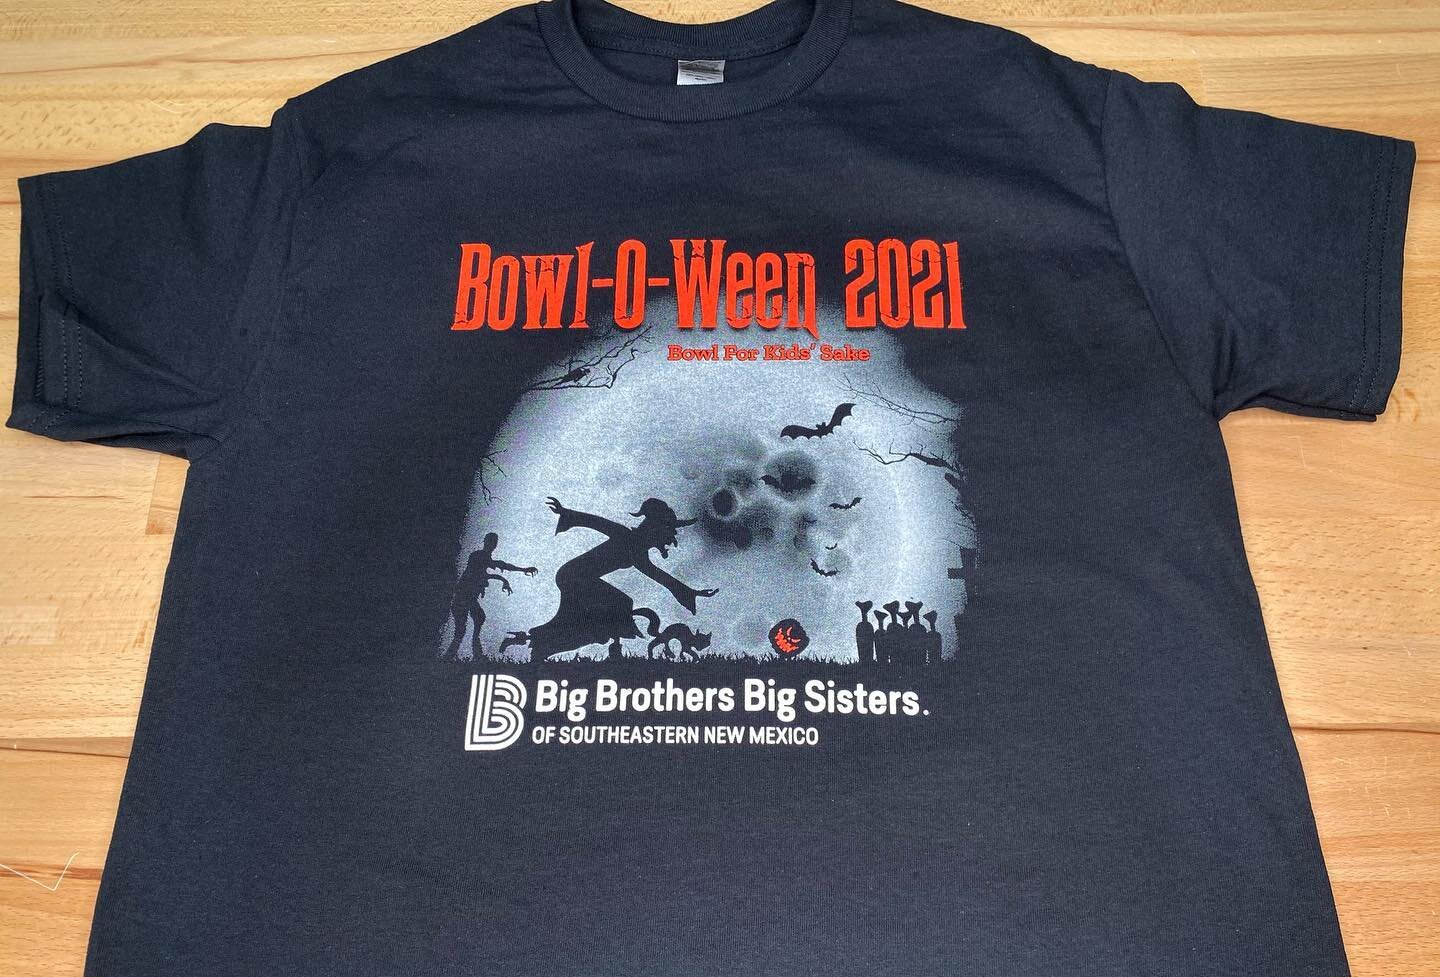 Bowl-O-Ween 2021 shirts. Go support a great cause!
.
.
#moonmanprinting #screenprintedshirts #localscreenprinter #halftones #thanksforsupportingsmallbusiness #bowloween #bbbs #bigbrothersbigsisters #halloween #bowling #roswellnm #roswellnewmexico